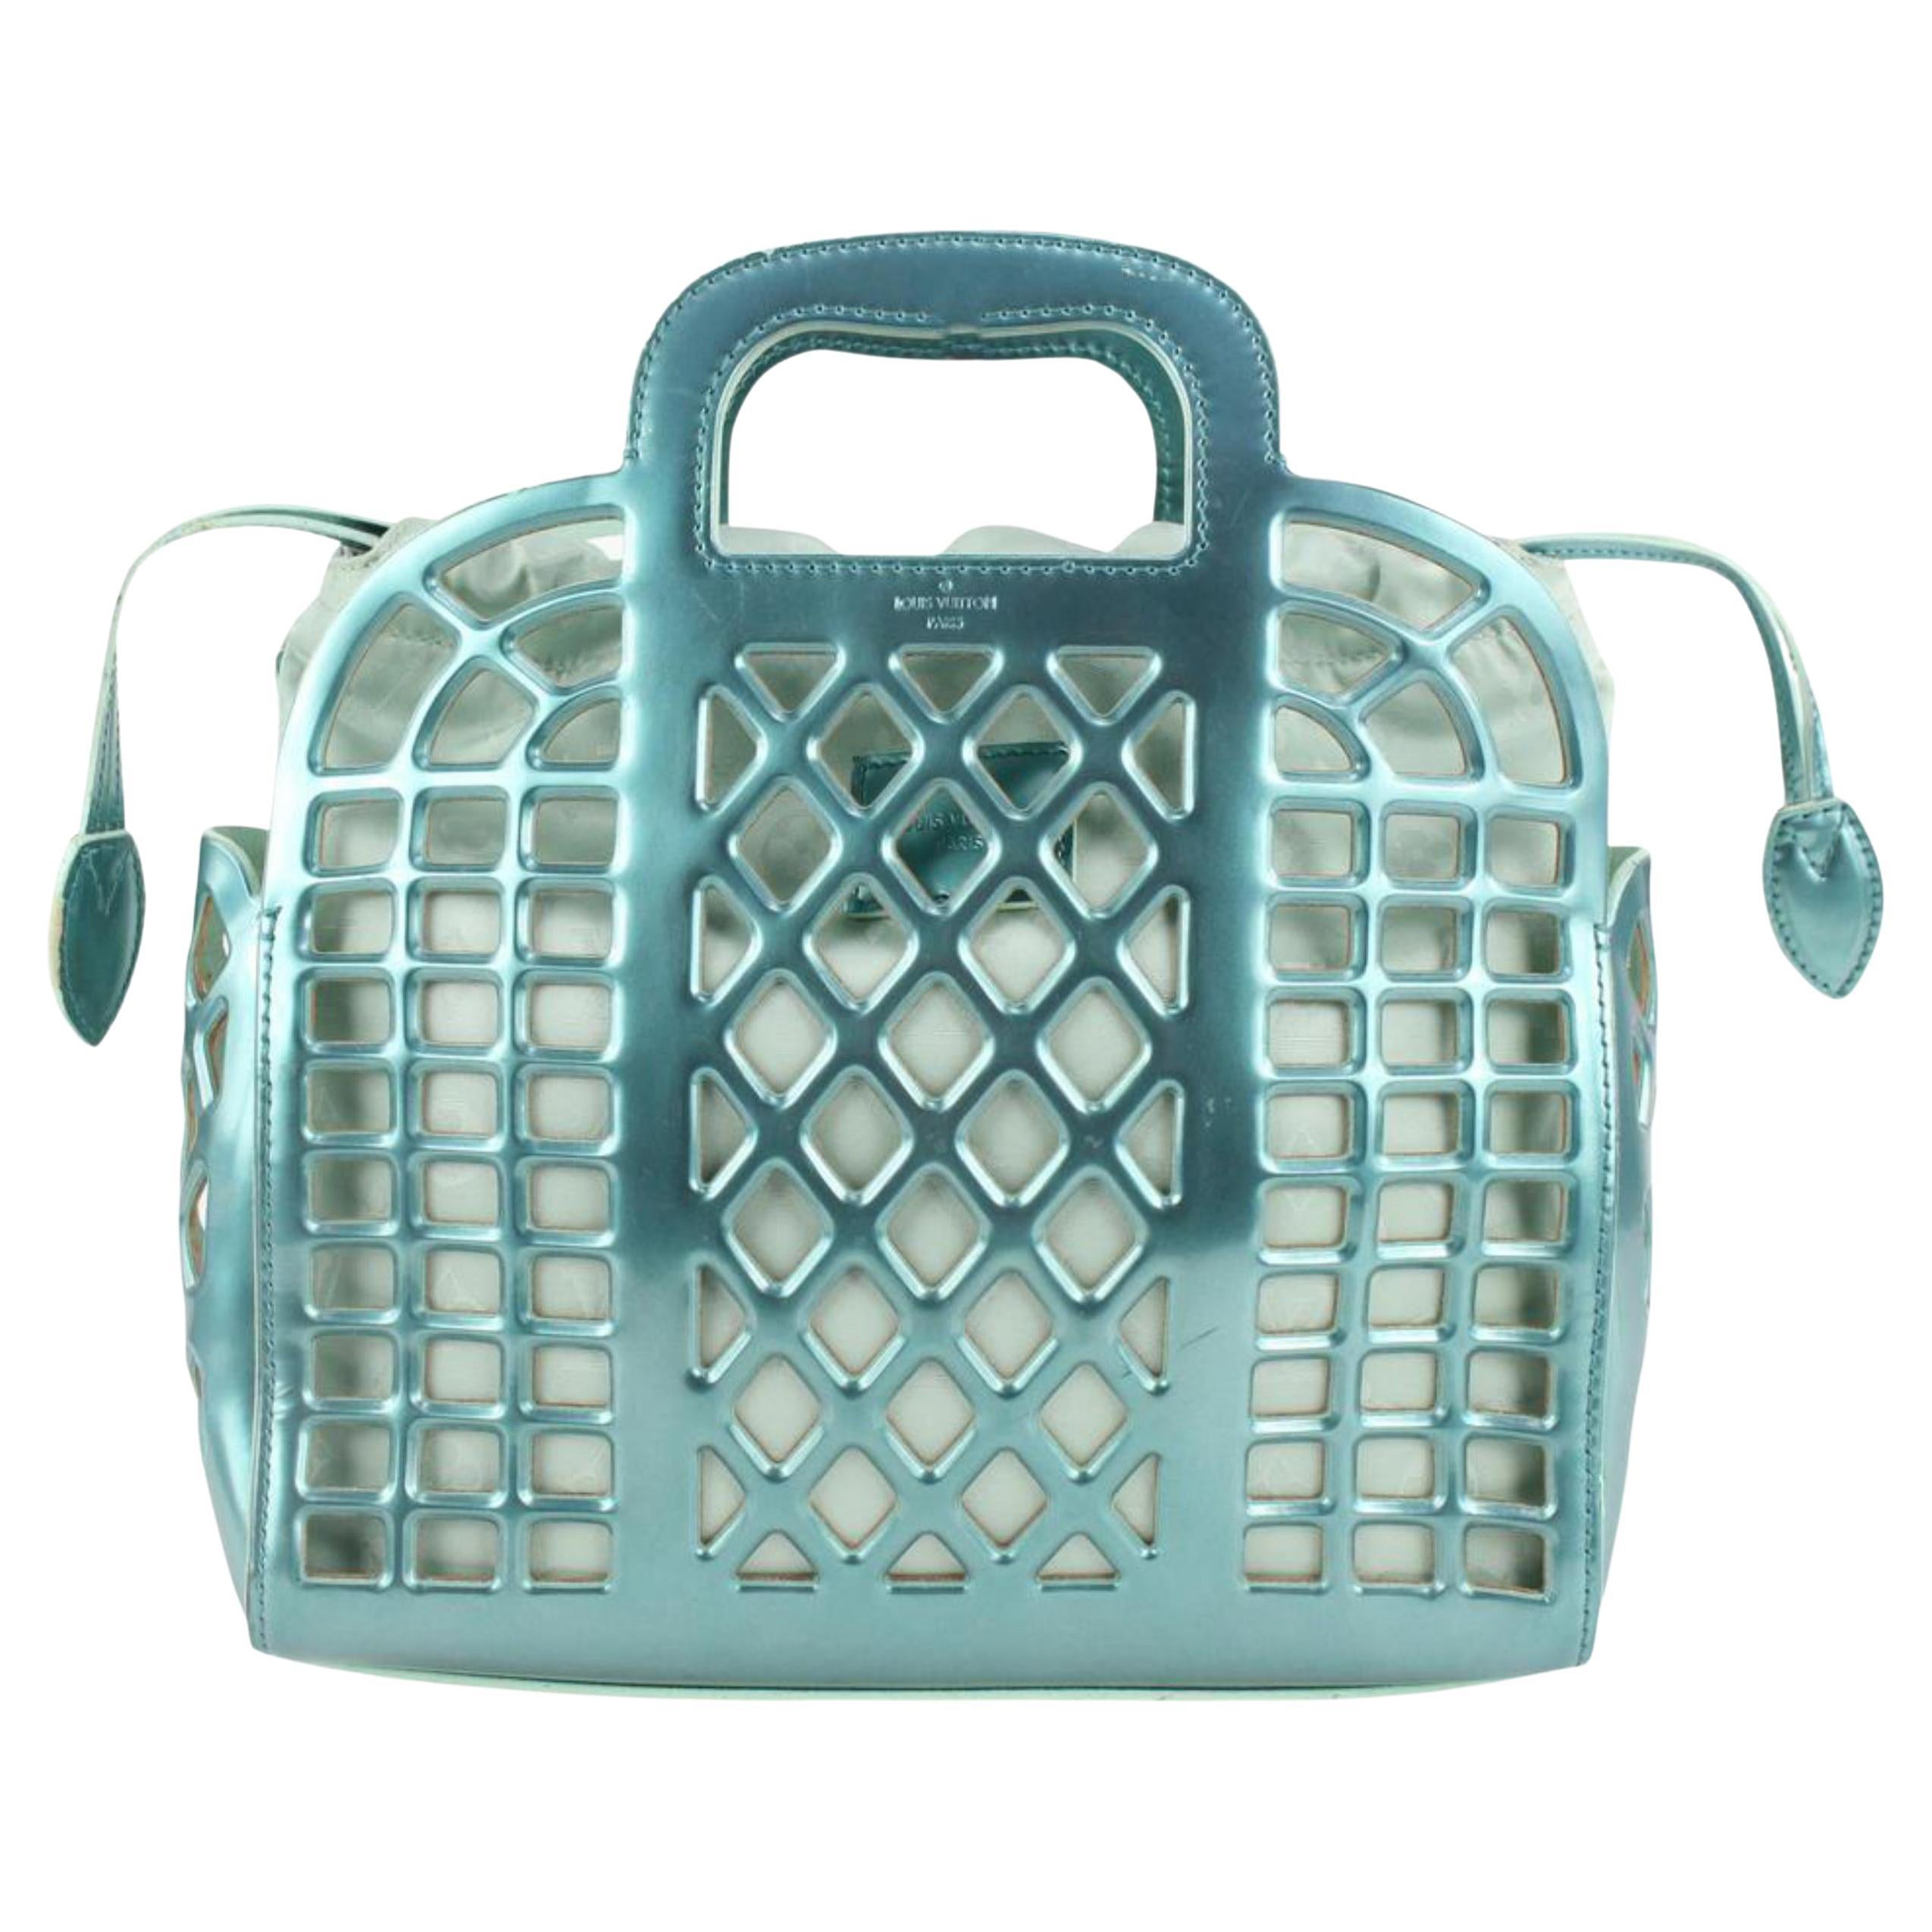 Louis Vuitton Limited Rare Turquoise Metallic Reef Patent Jelly Basket 1111lv32